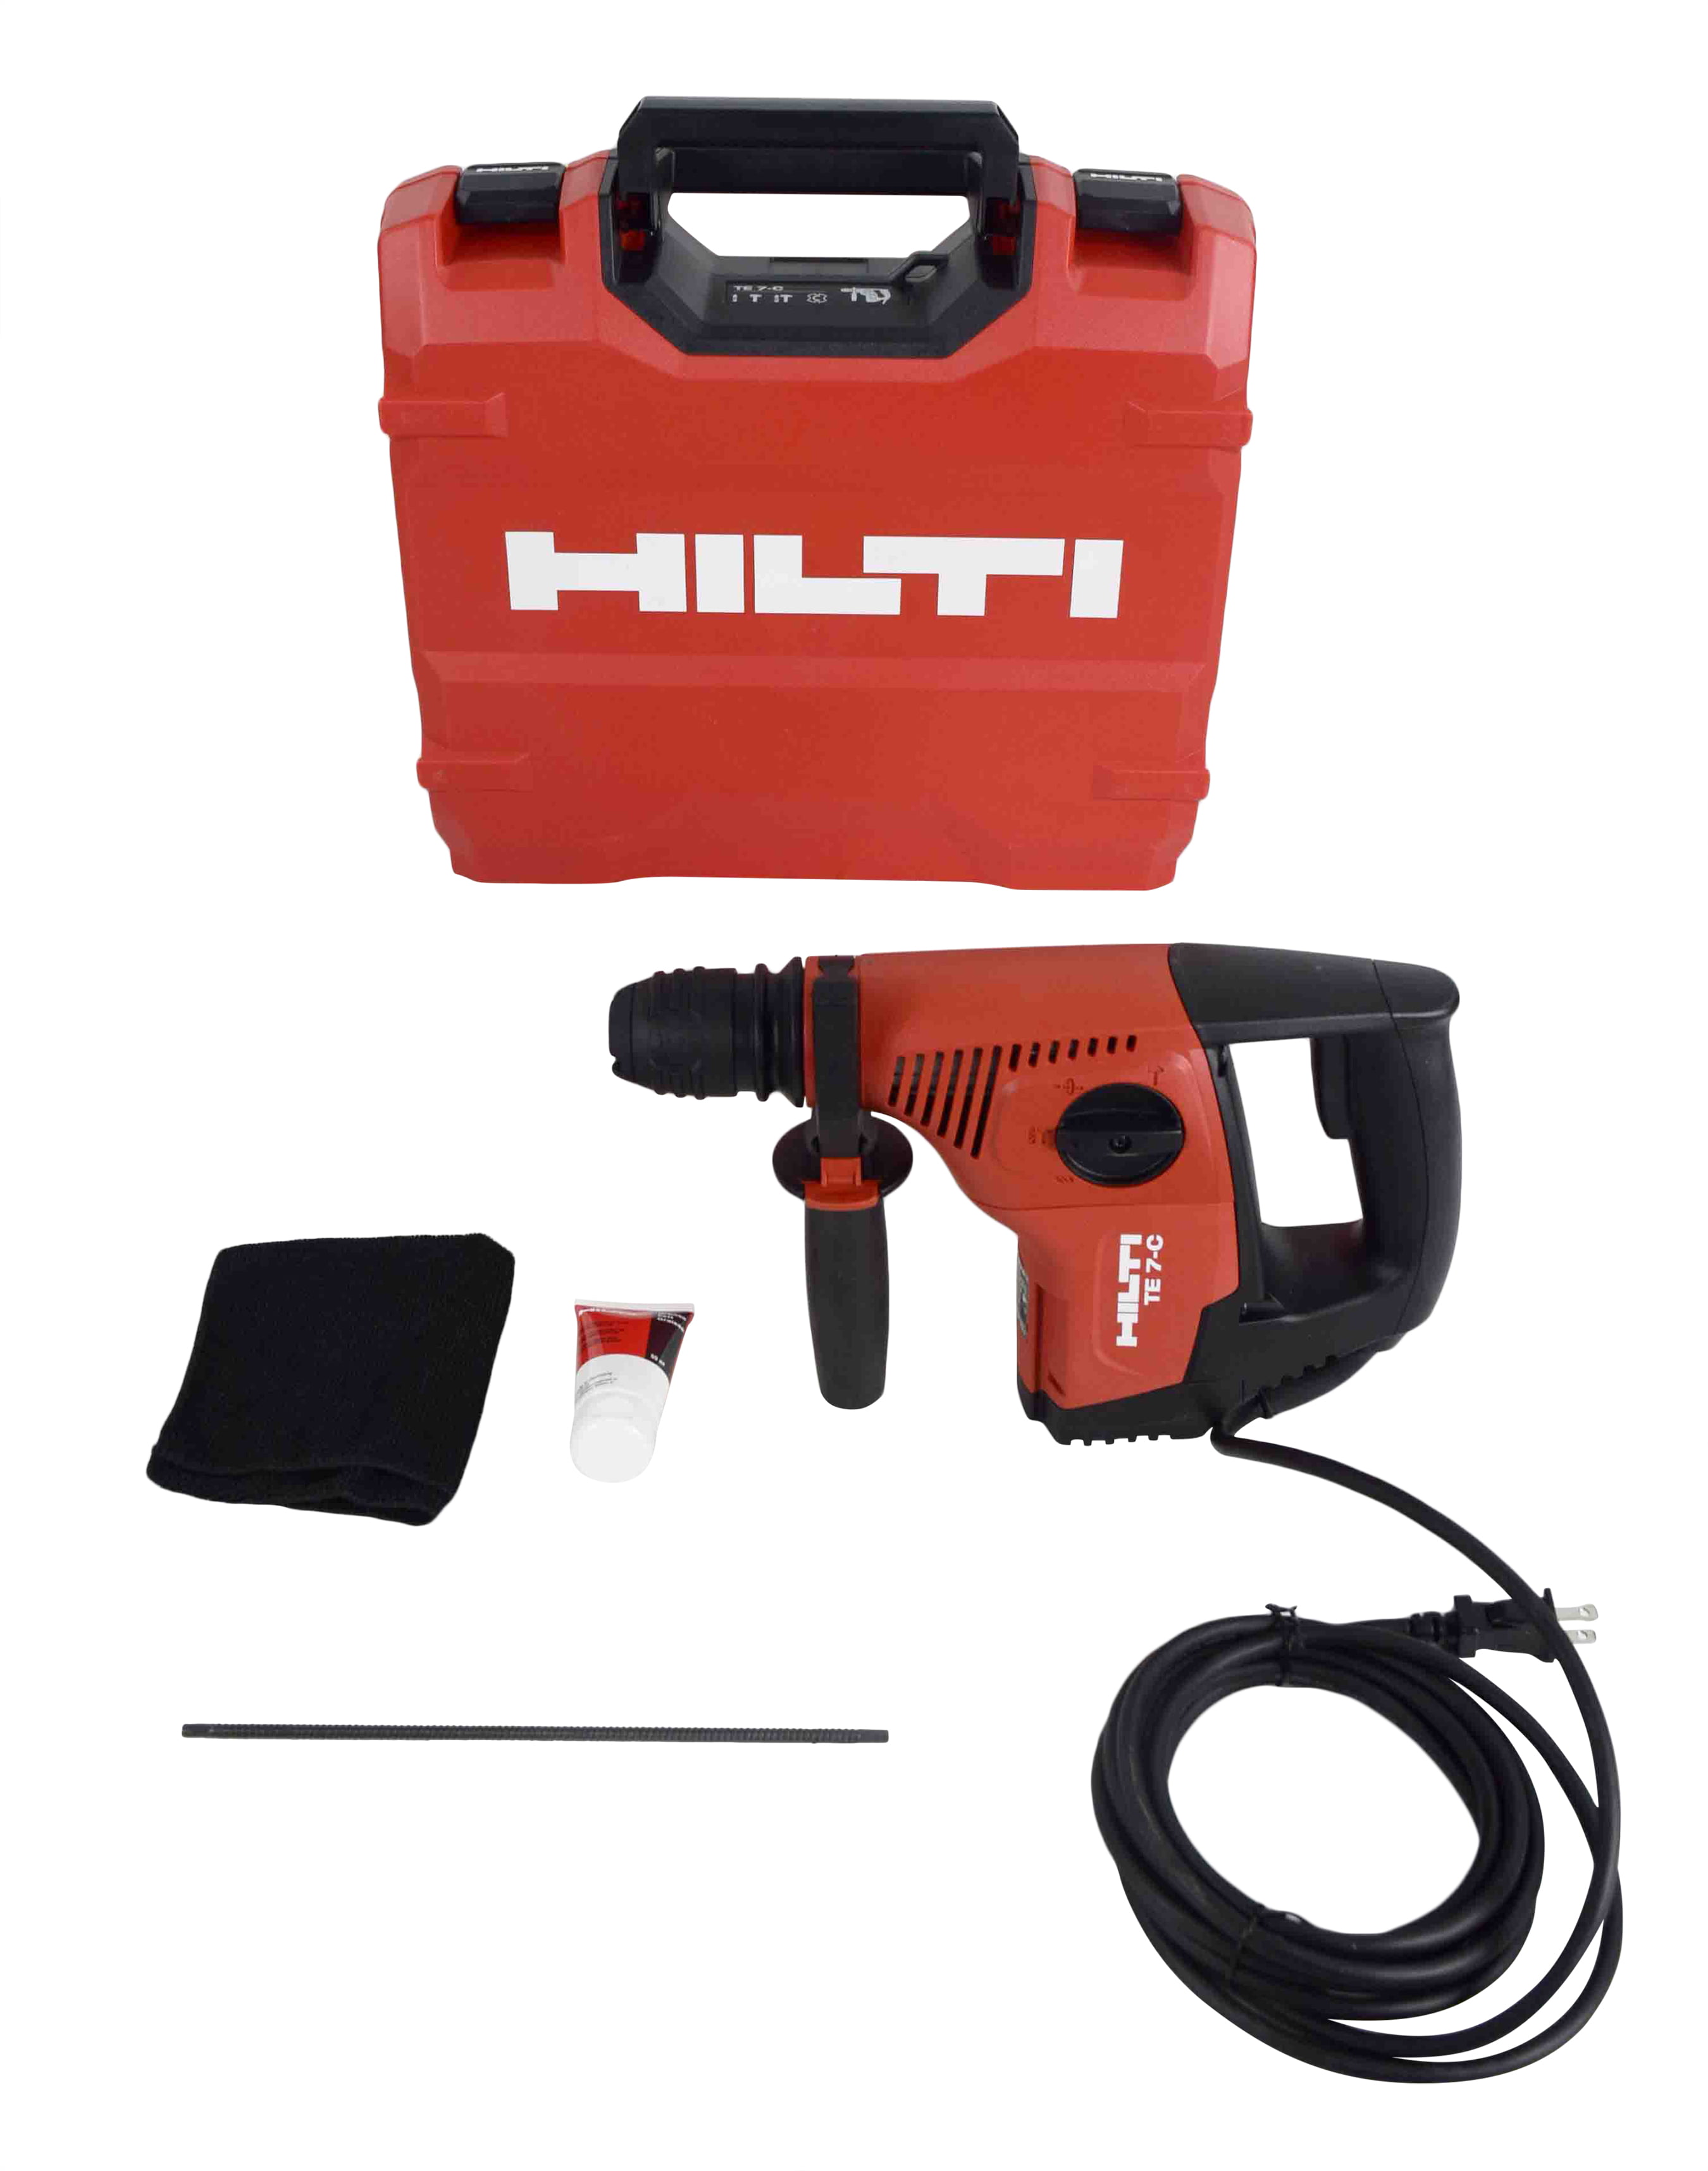 Hilti 120V Corded SDS-Plus Rotary Hammer Drill TE 228061 with Carrying Case - Walmart.com